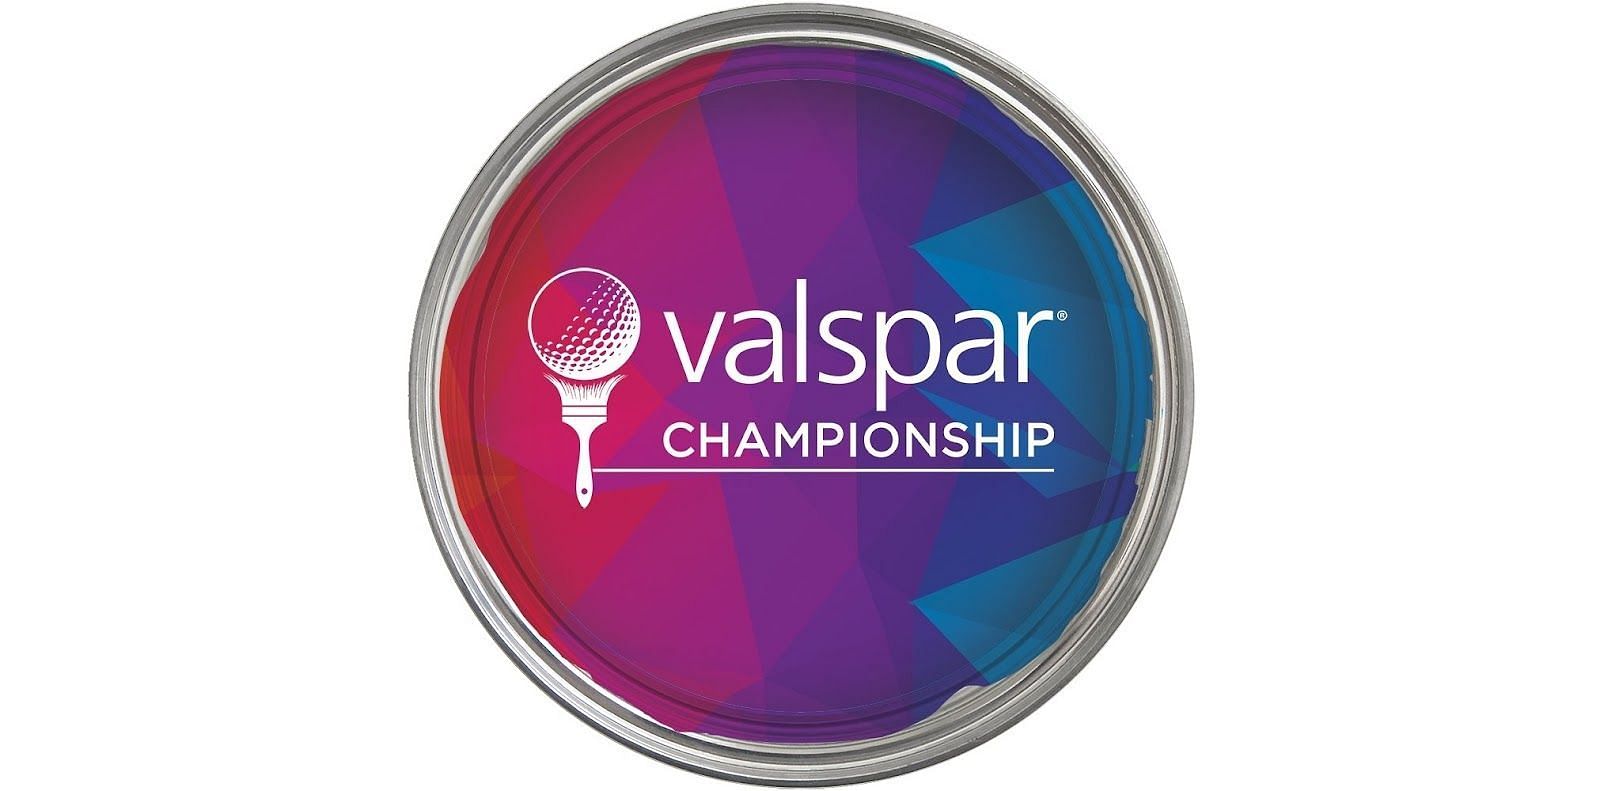 List of Players who won Valspar Championship Year by Year